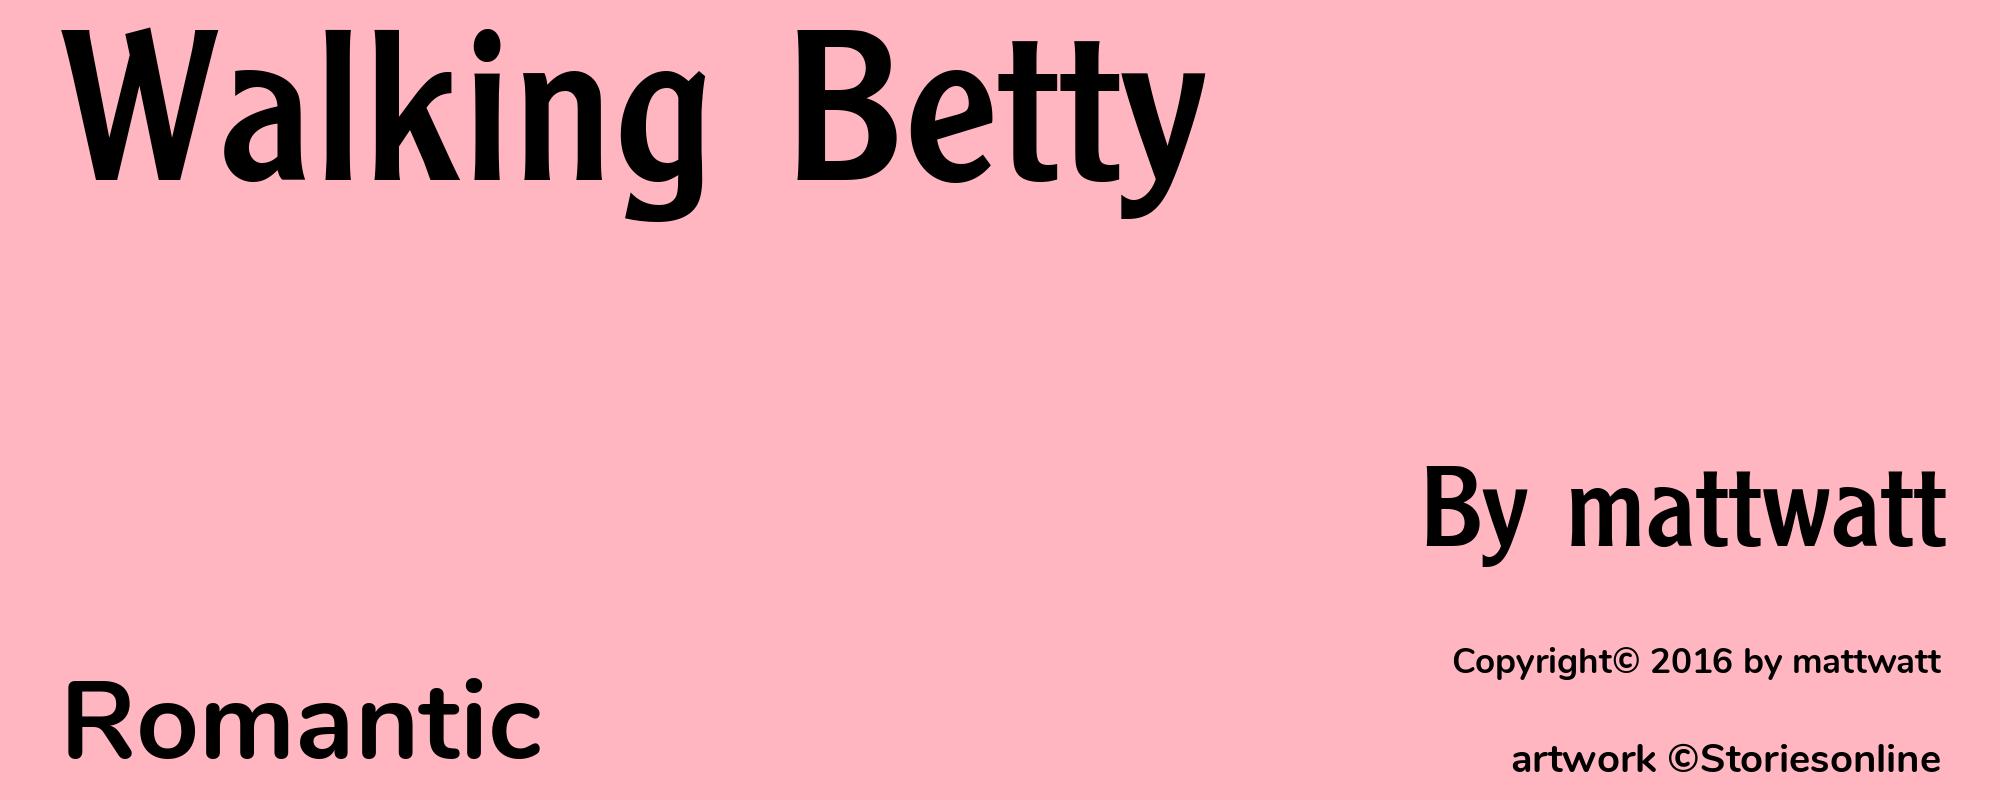 Walking Betty - Cover